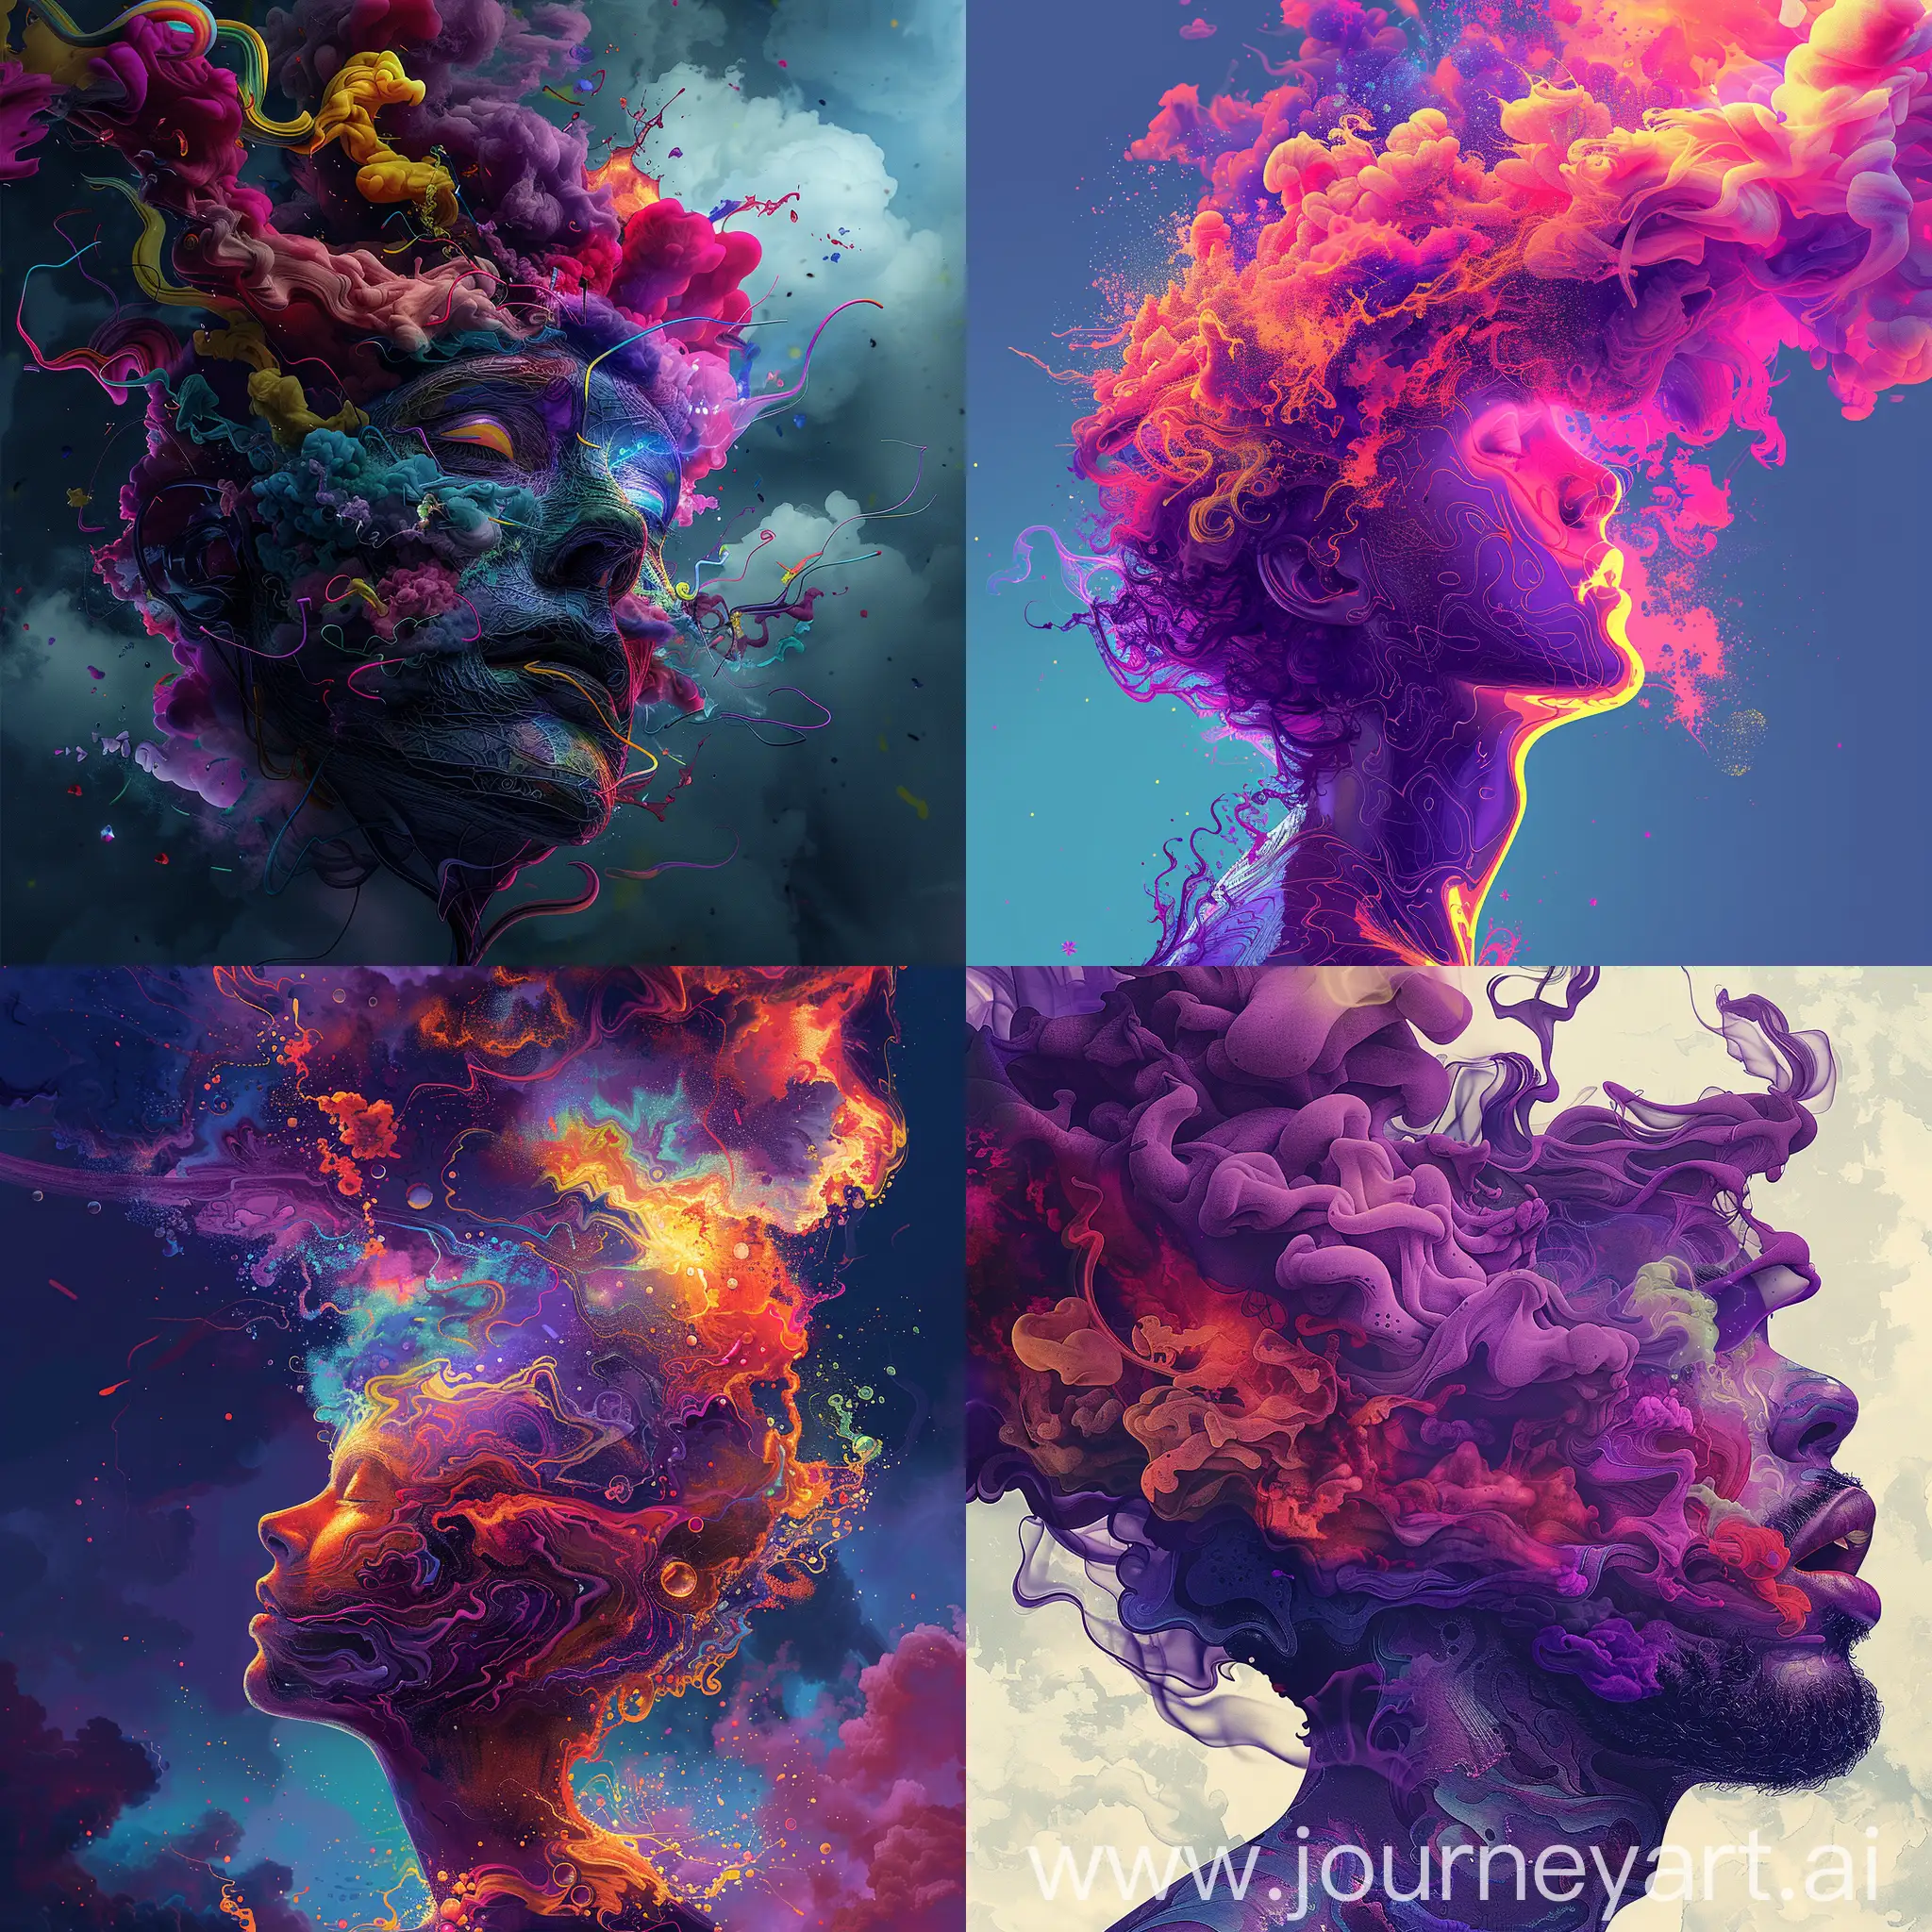 Psychedelic portrait Illustration,chaotic storm of liquid smoke in the head, colourful design futuristic fashion abstract portrait Illustration style in the style of Anato Finnstark and Alberto Vargas, excellent composition, concept art, detailed, dynamic pose, bright colors.
